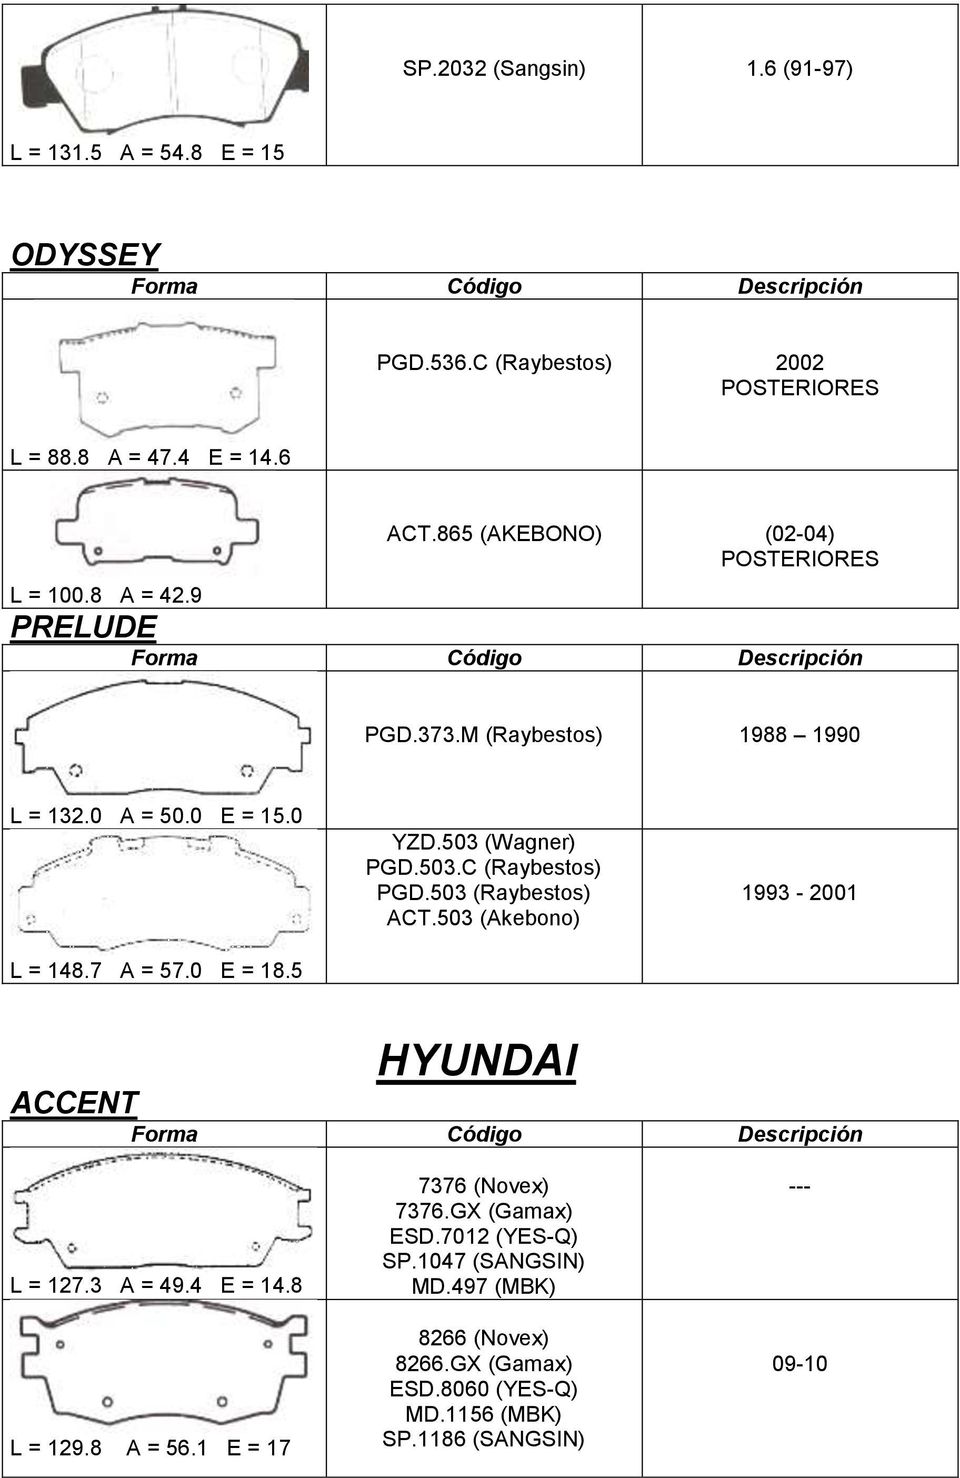 503 (Wagner) PGD.503.C (Raybestos) PGD.503 (Raybestos) ACT.503 (Akebono) 1993-2001 HYUNDAI ACCENT L = 127.3 A = 49.4 E = 14.8 L = 129.8 A = 56.